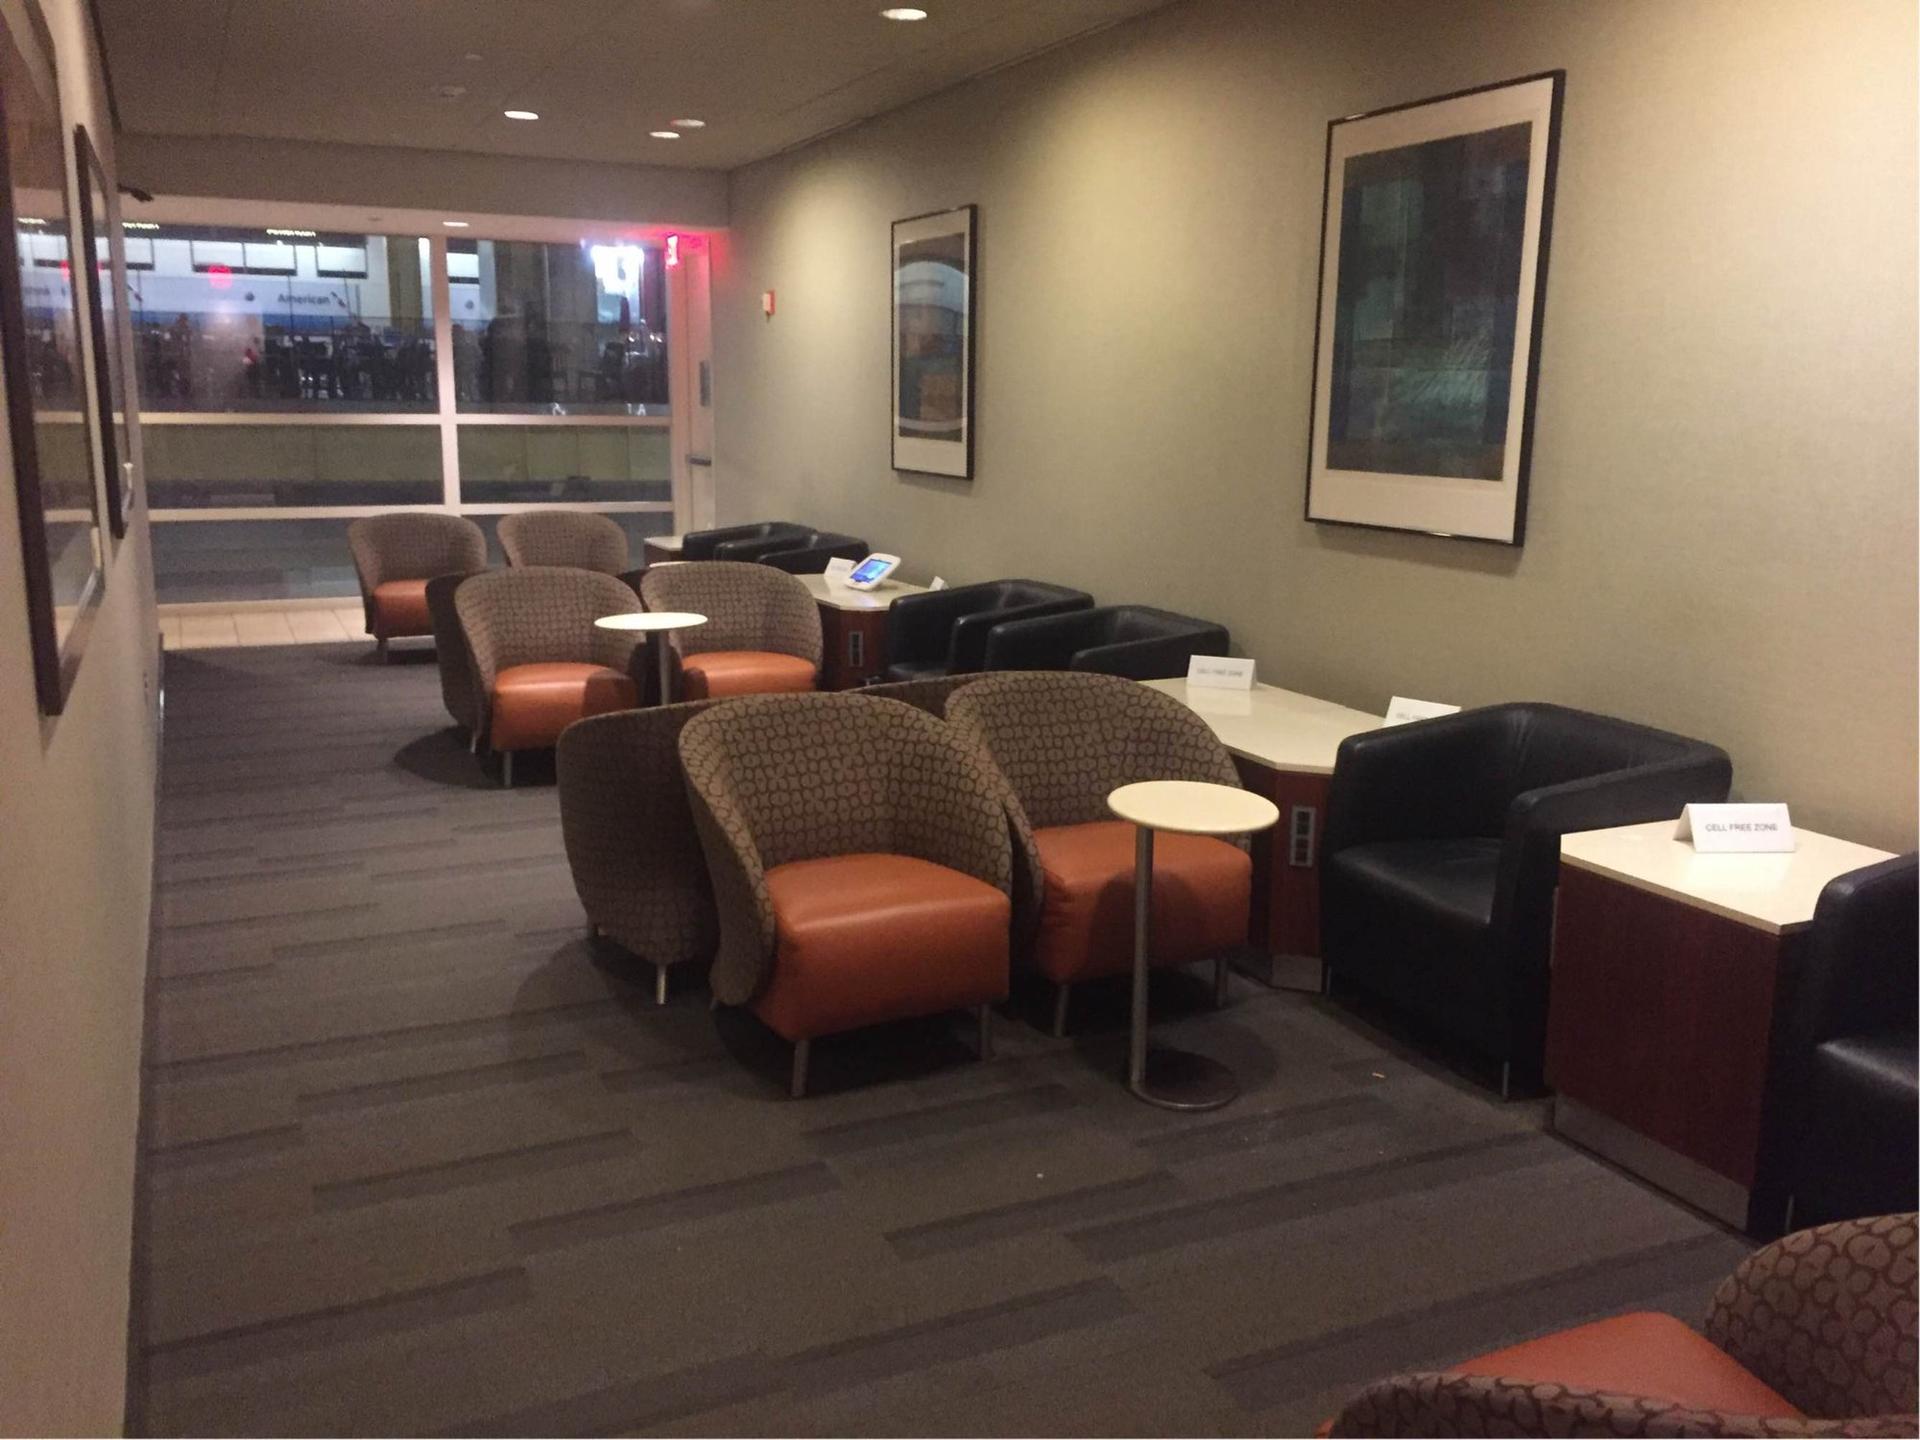 American Airlines Admirals Club image 19 of 22